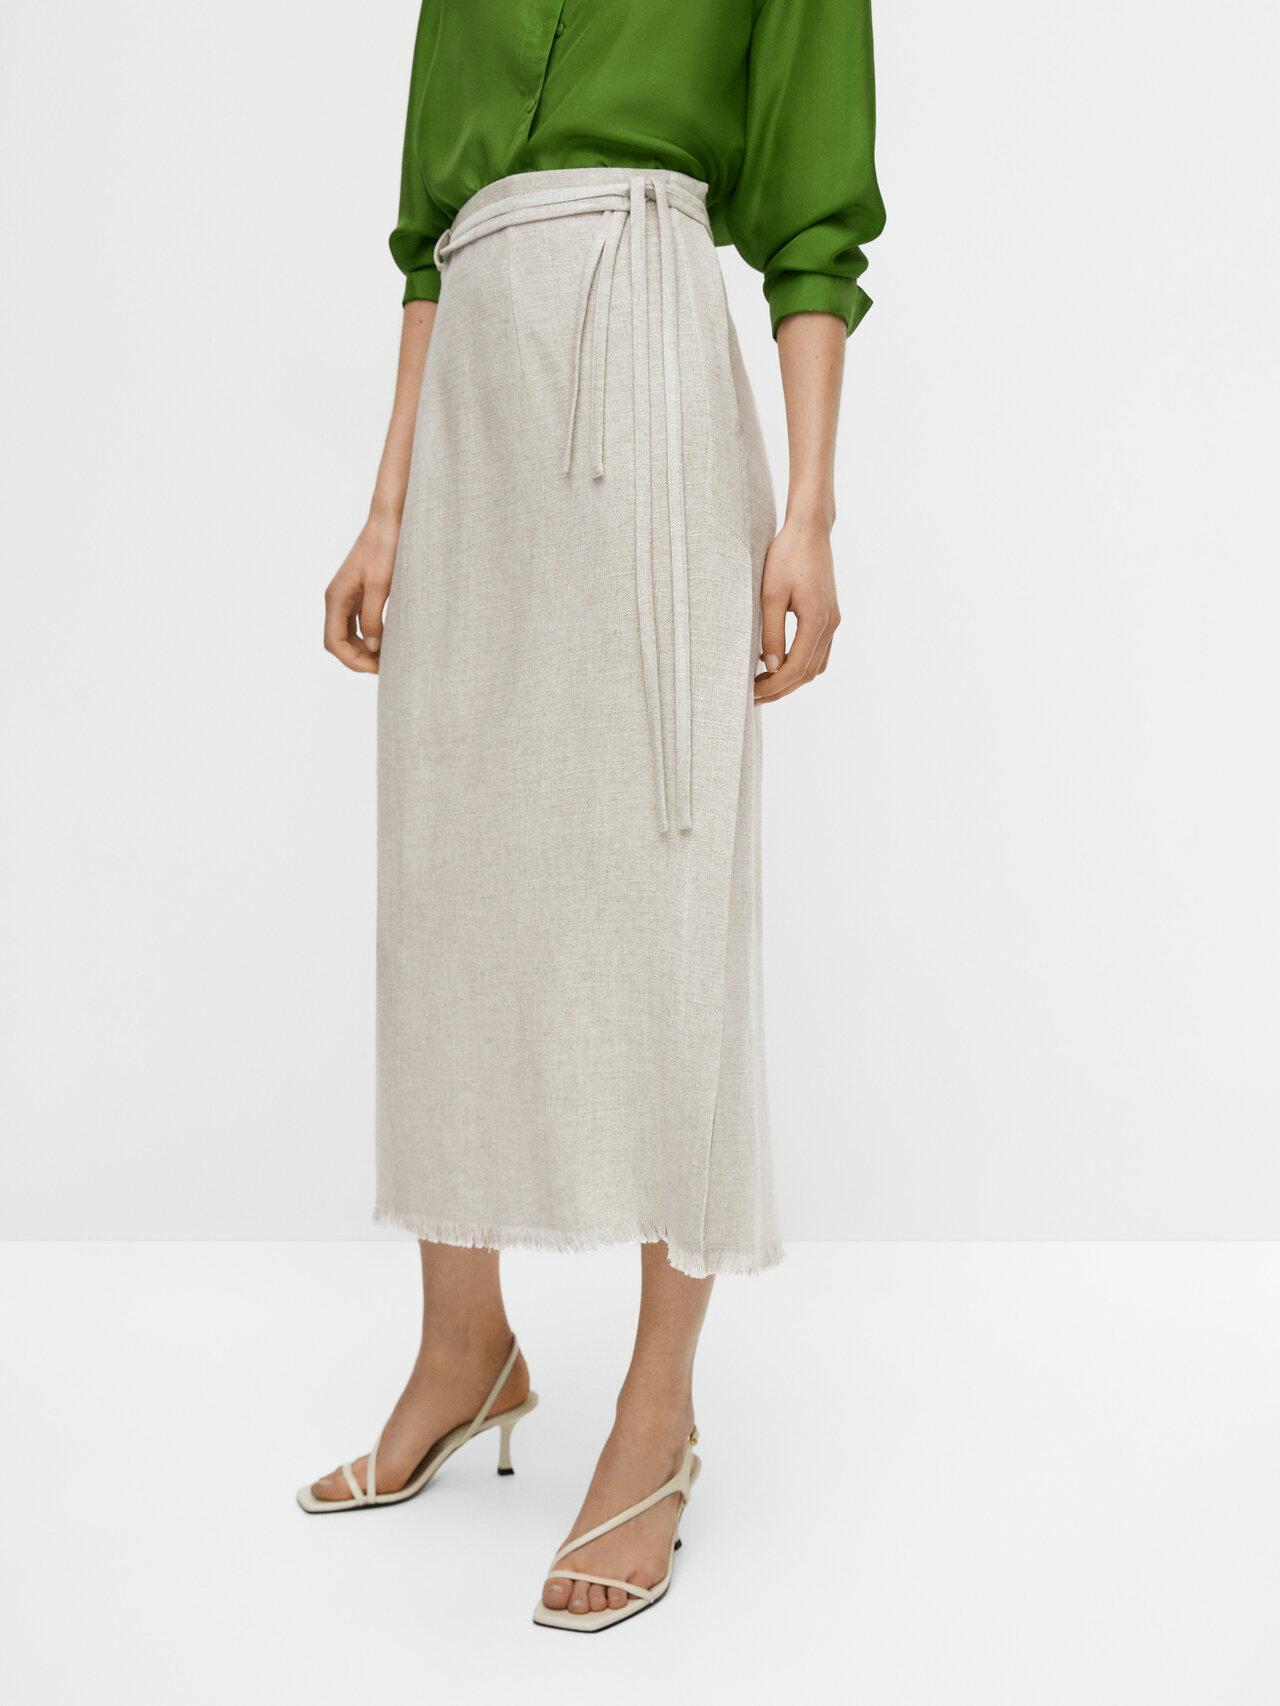 MASSIMO DUTTI Frayed Midi Skirt With Belt in Natural | Lyst